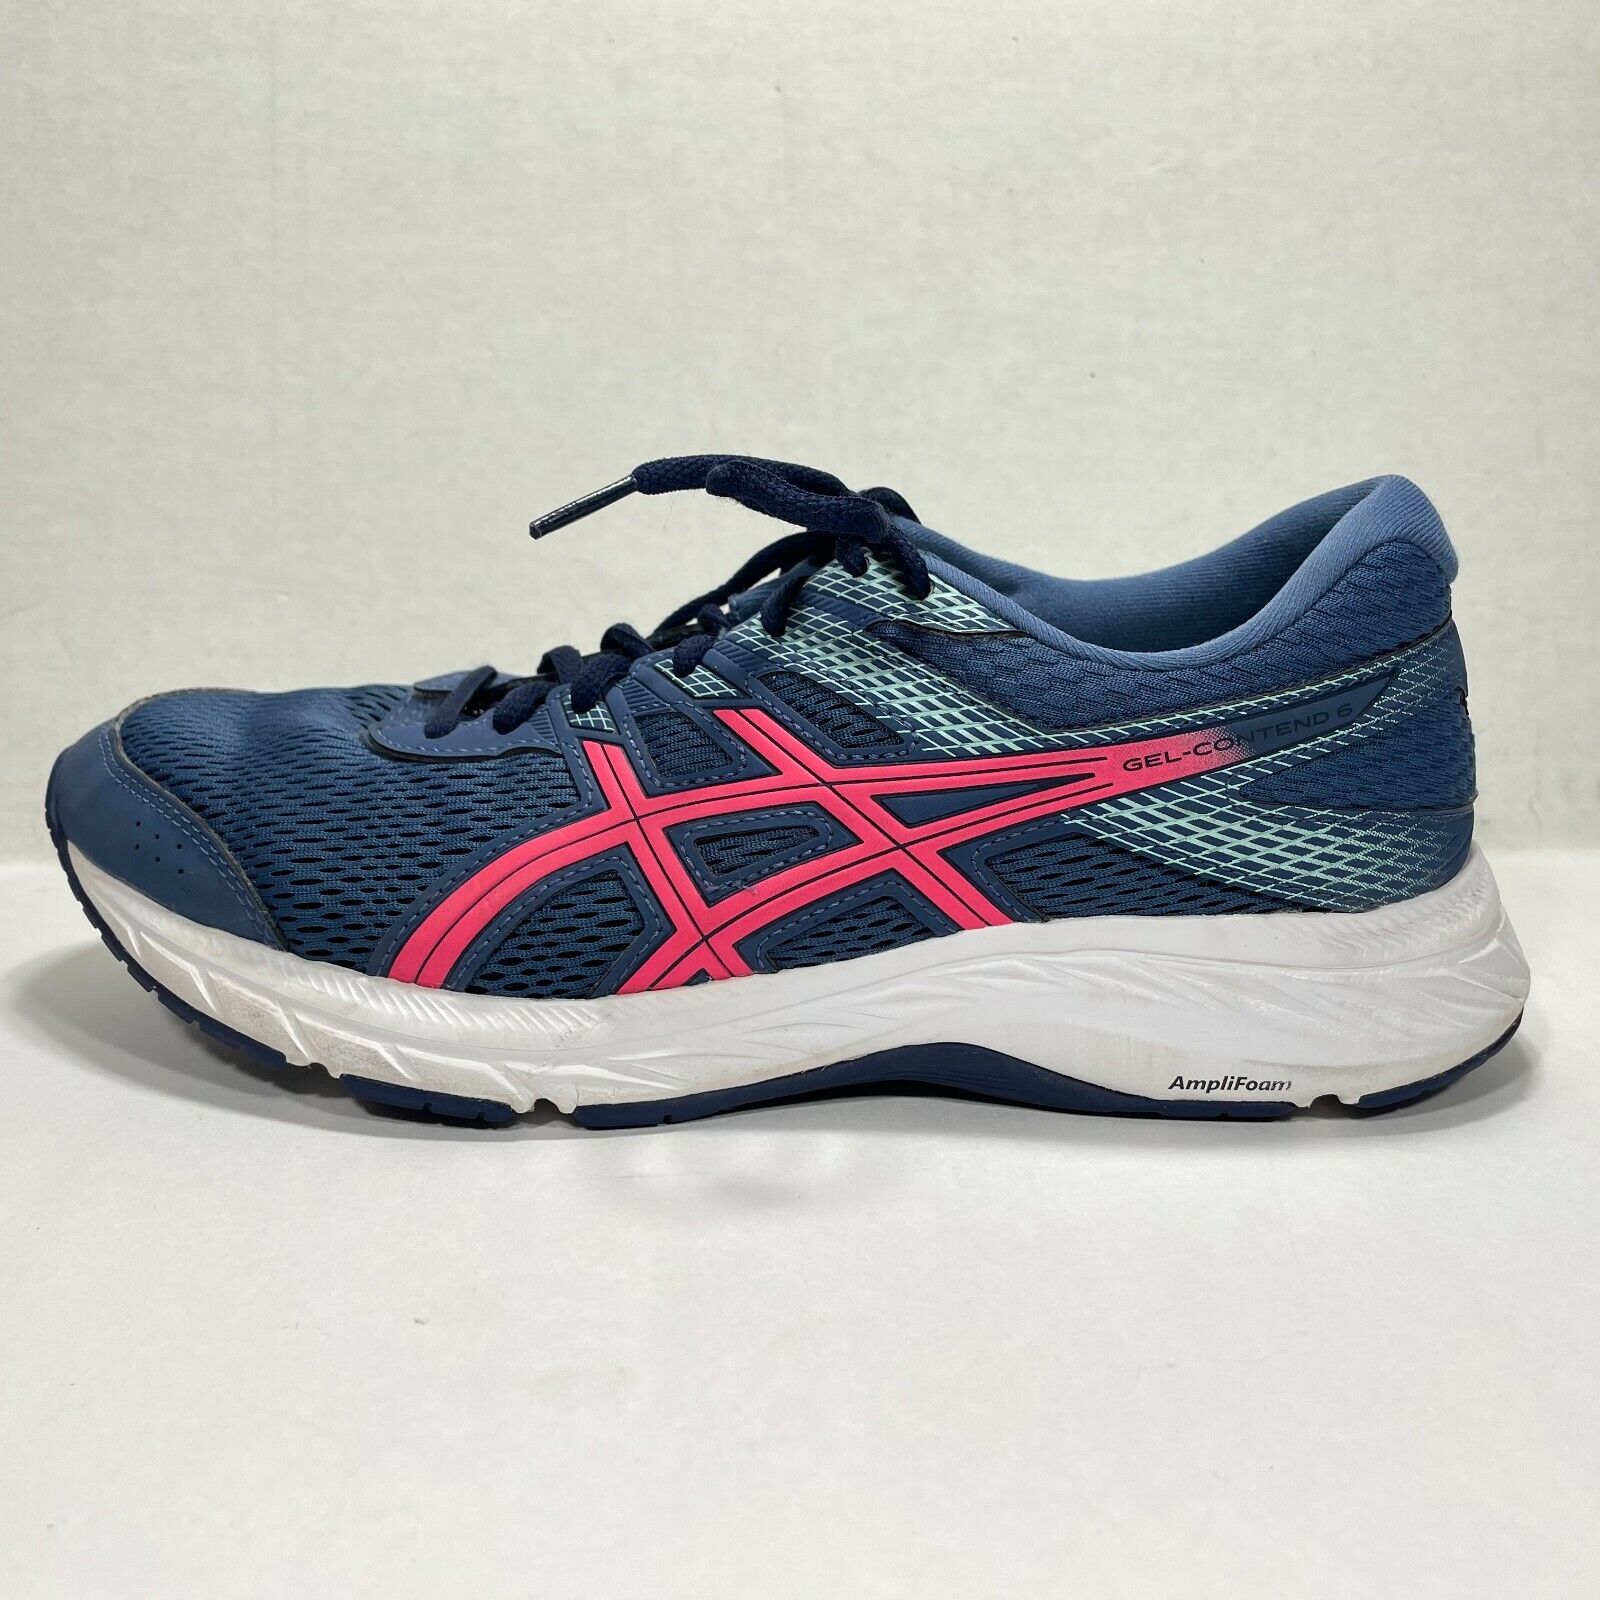 ASICS Gel-Contend 6 Womens 1012A571 Blue Pink Athletic Running Shoes US 9.5 Wide